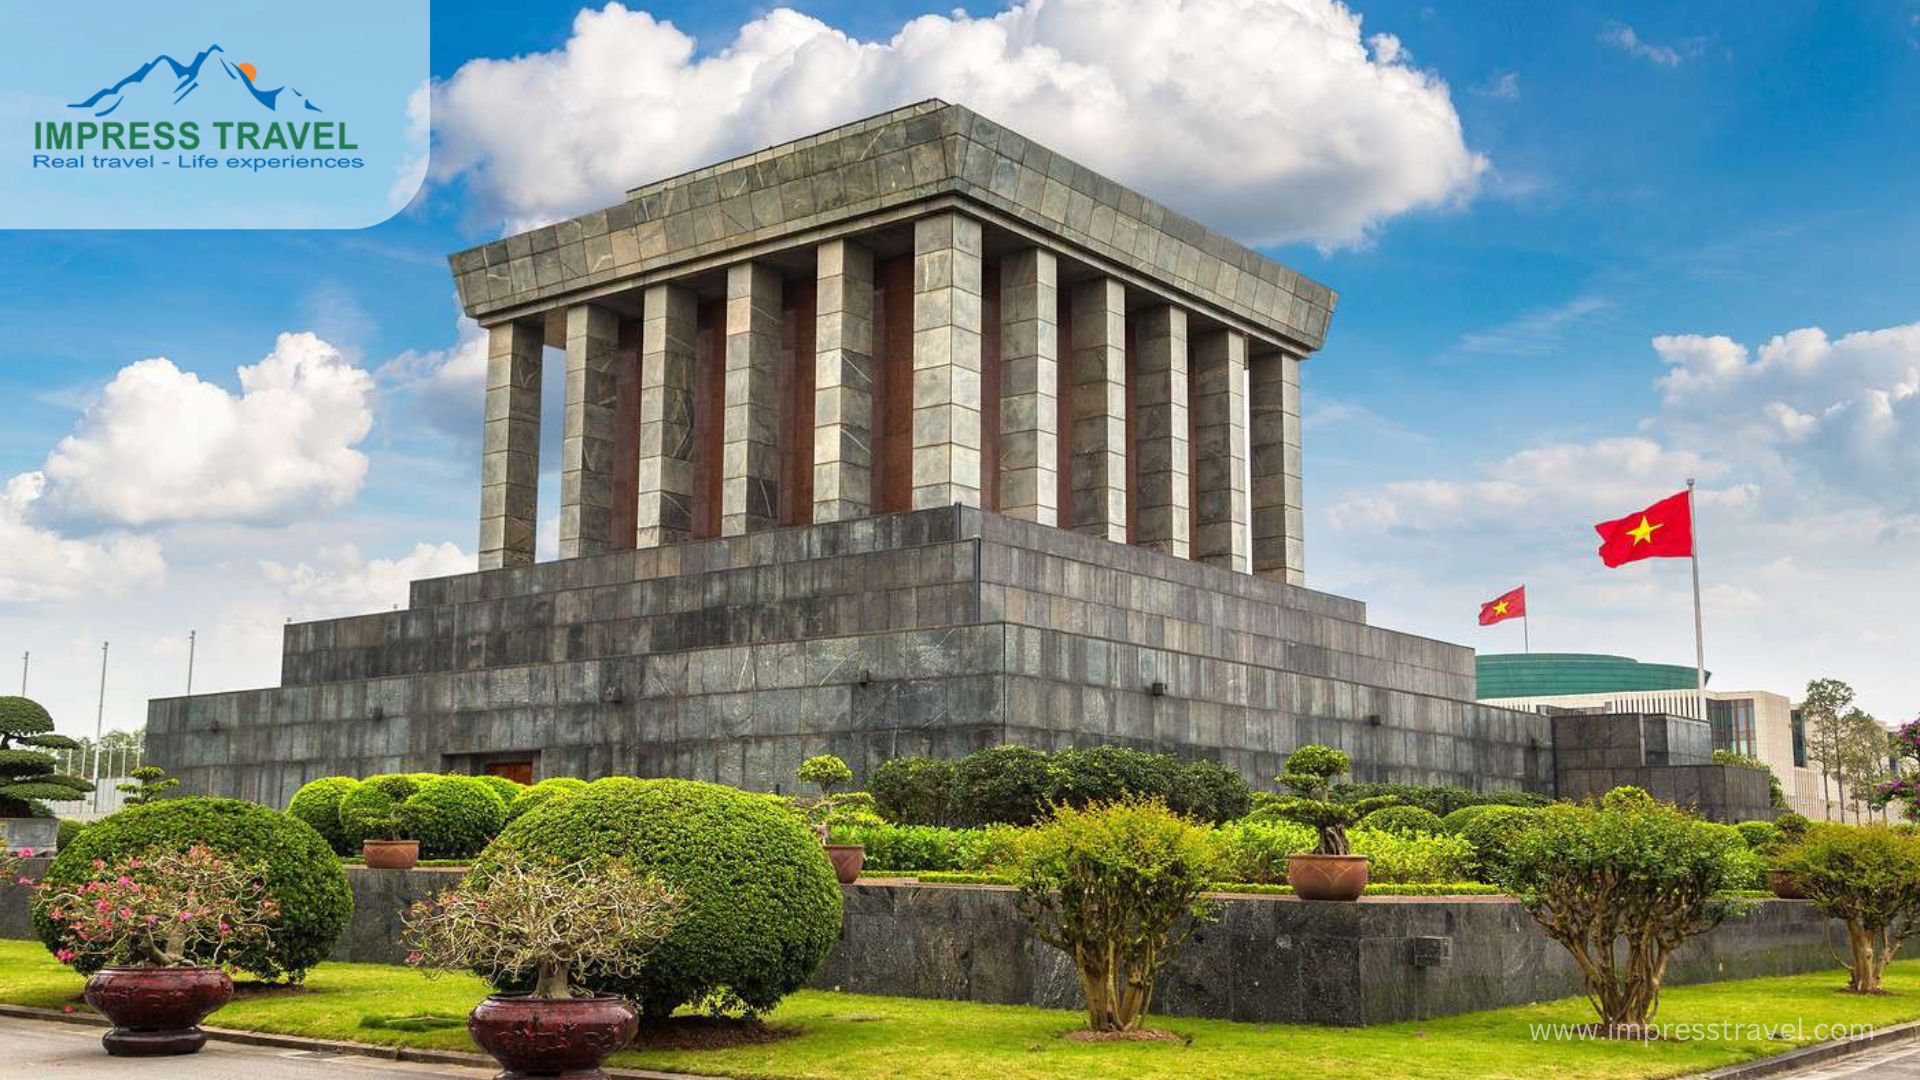 Hanoi location-Ho Chi Minh Mausoleum Complex, where you can visit the final resting place of President Ho Chi Minh and learn more about his life and legacy